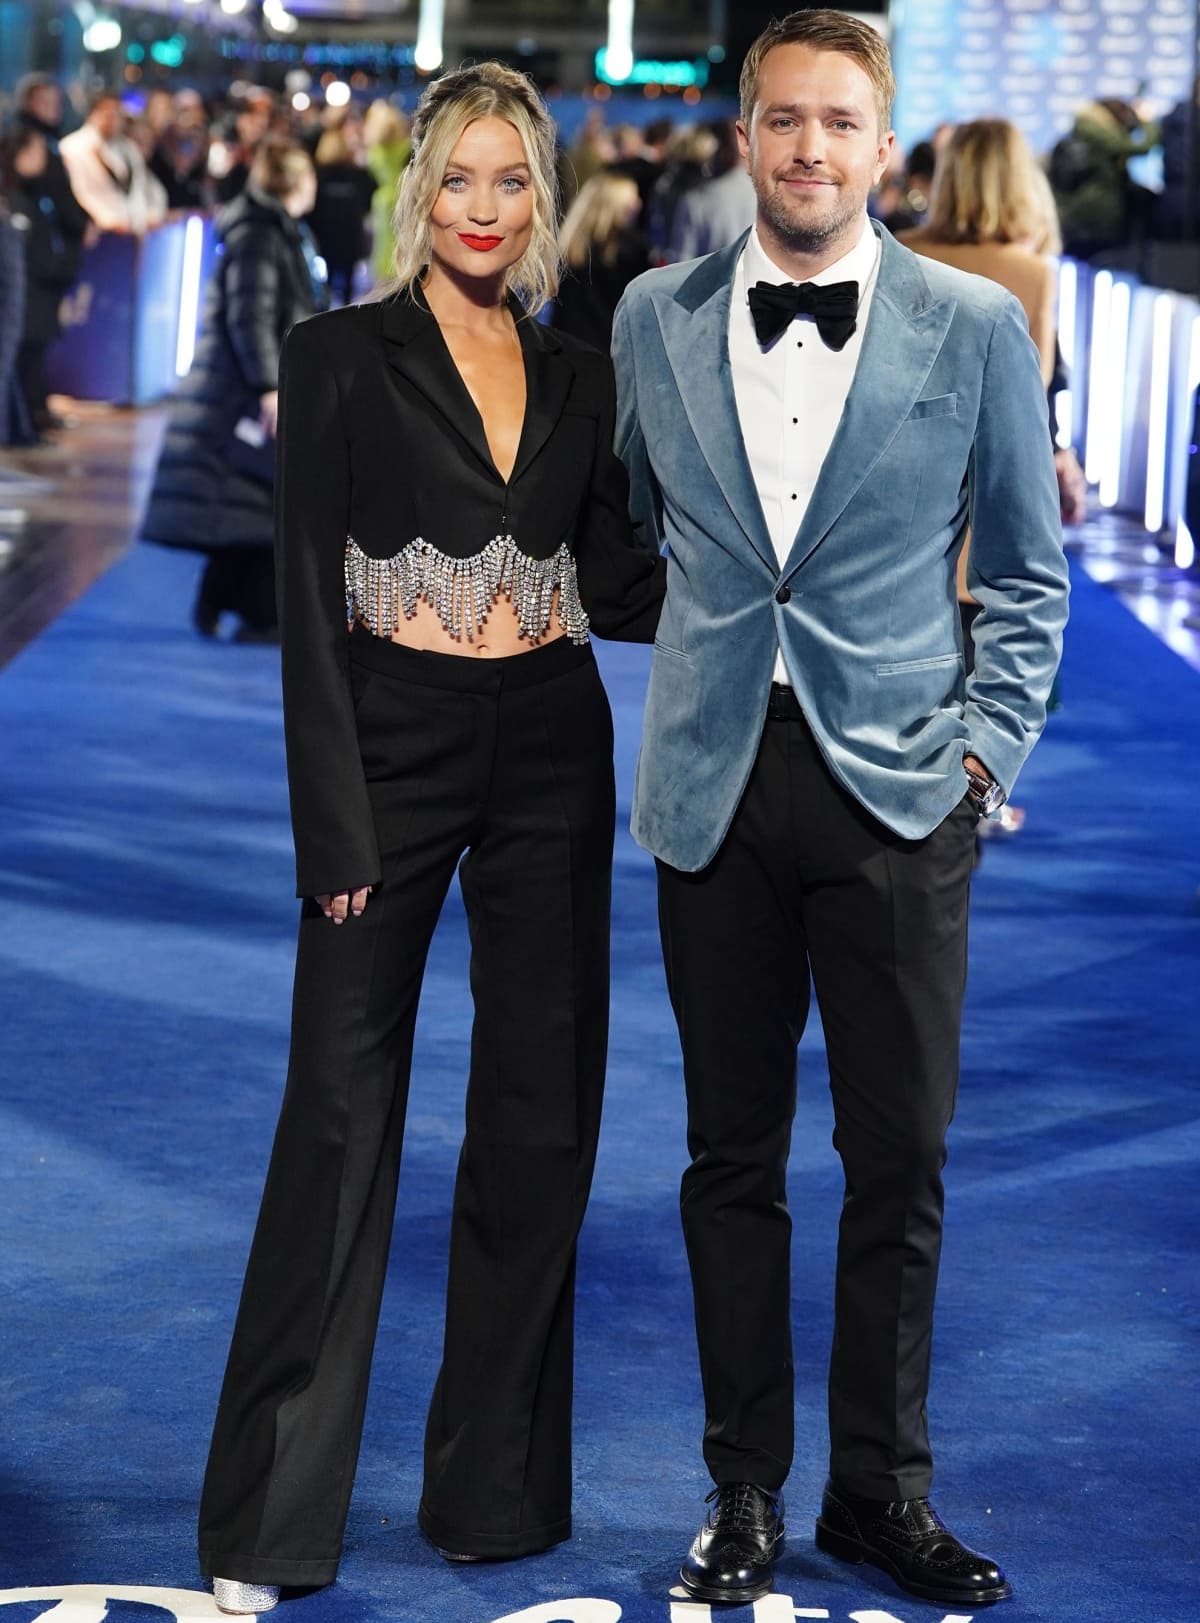 Laura Whitmore with Iain Stirling at the 2022 ITV Palooza